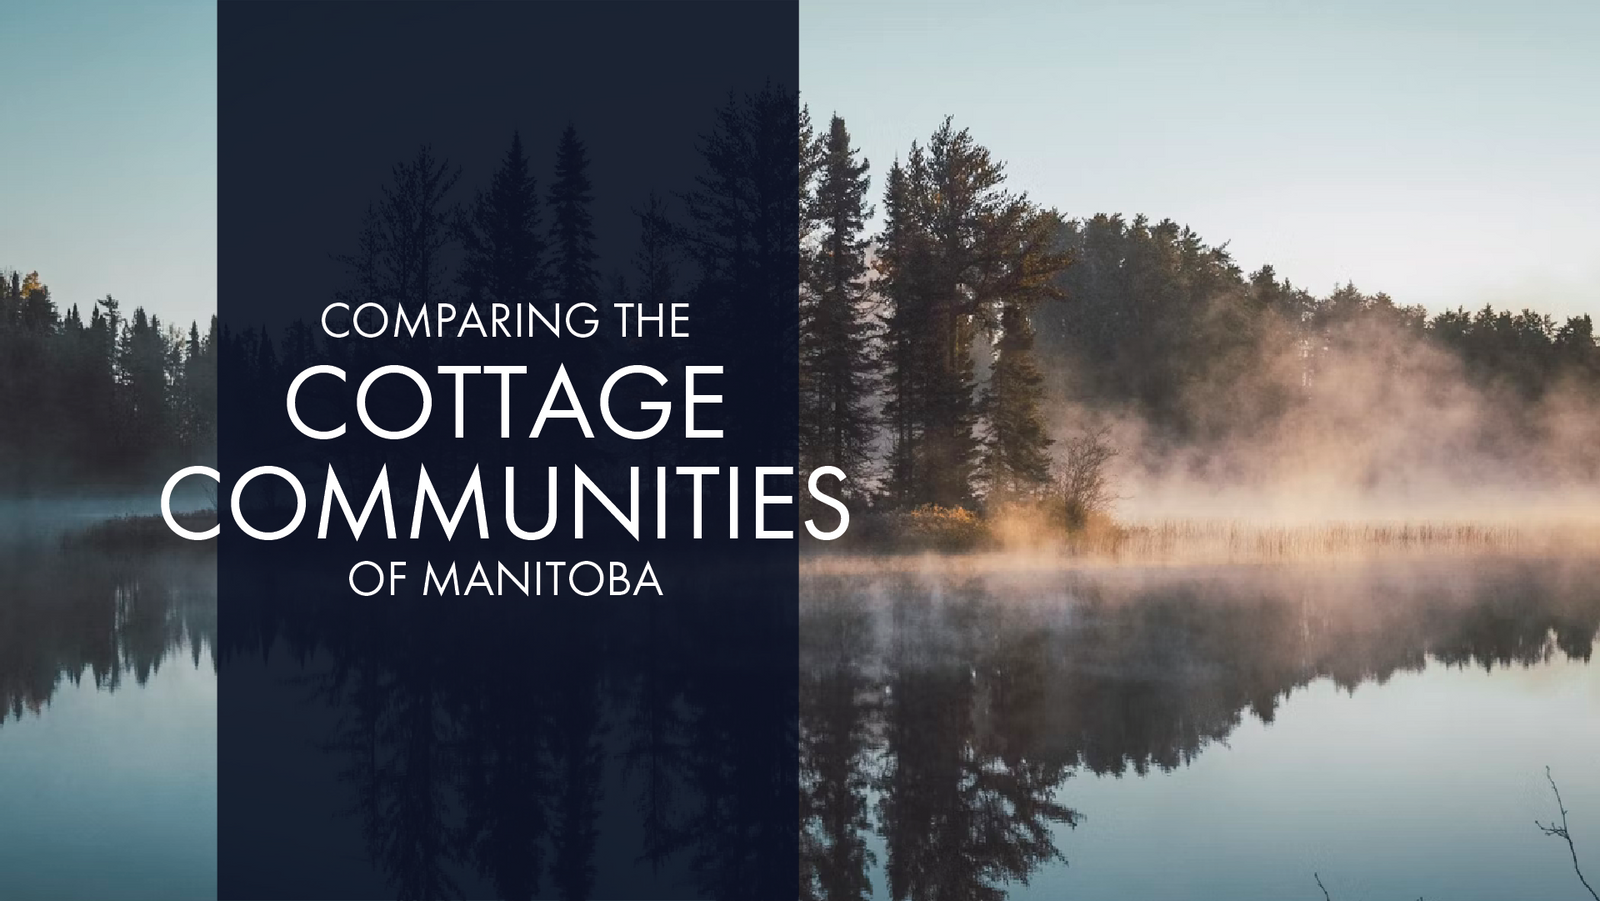 Comparing the Cottage Communities of Manitoba